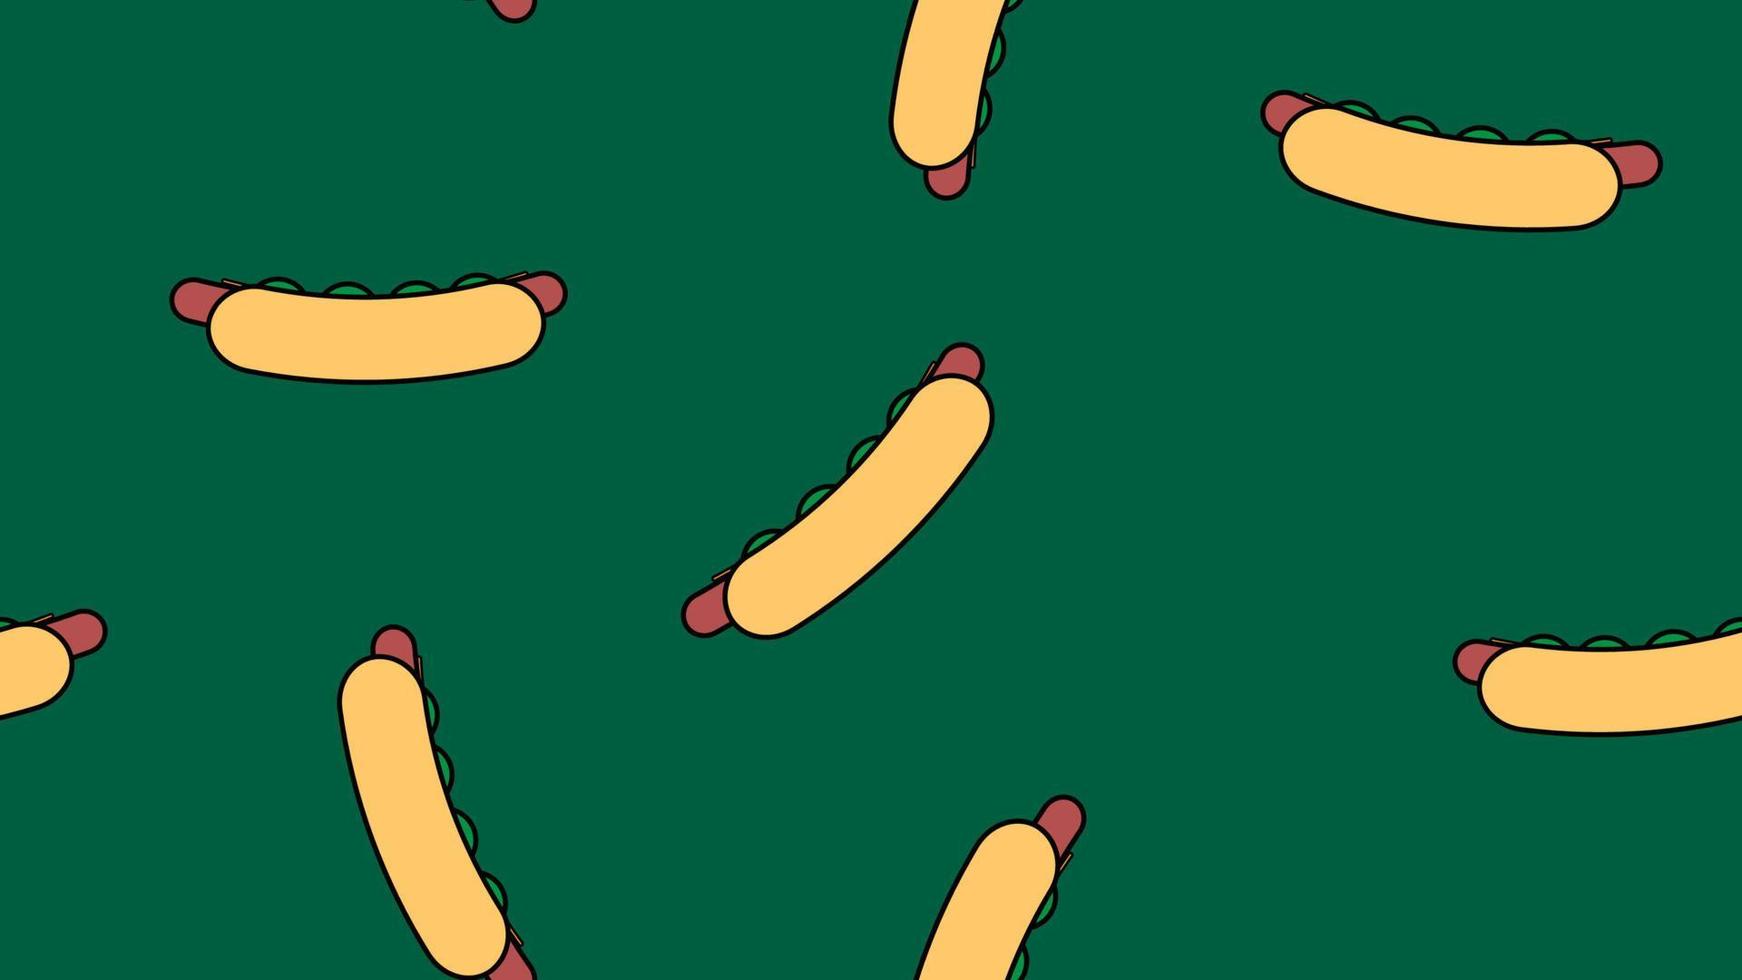 hot dog on a green background, vector illustration, pattern. sausage sandwich, stuffed, appetizing bun. decor of kitchen, cafe, restaurant. decoration, wallpaper for catering